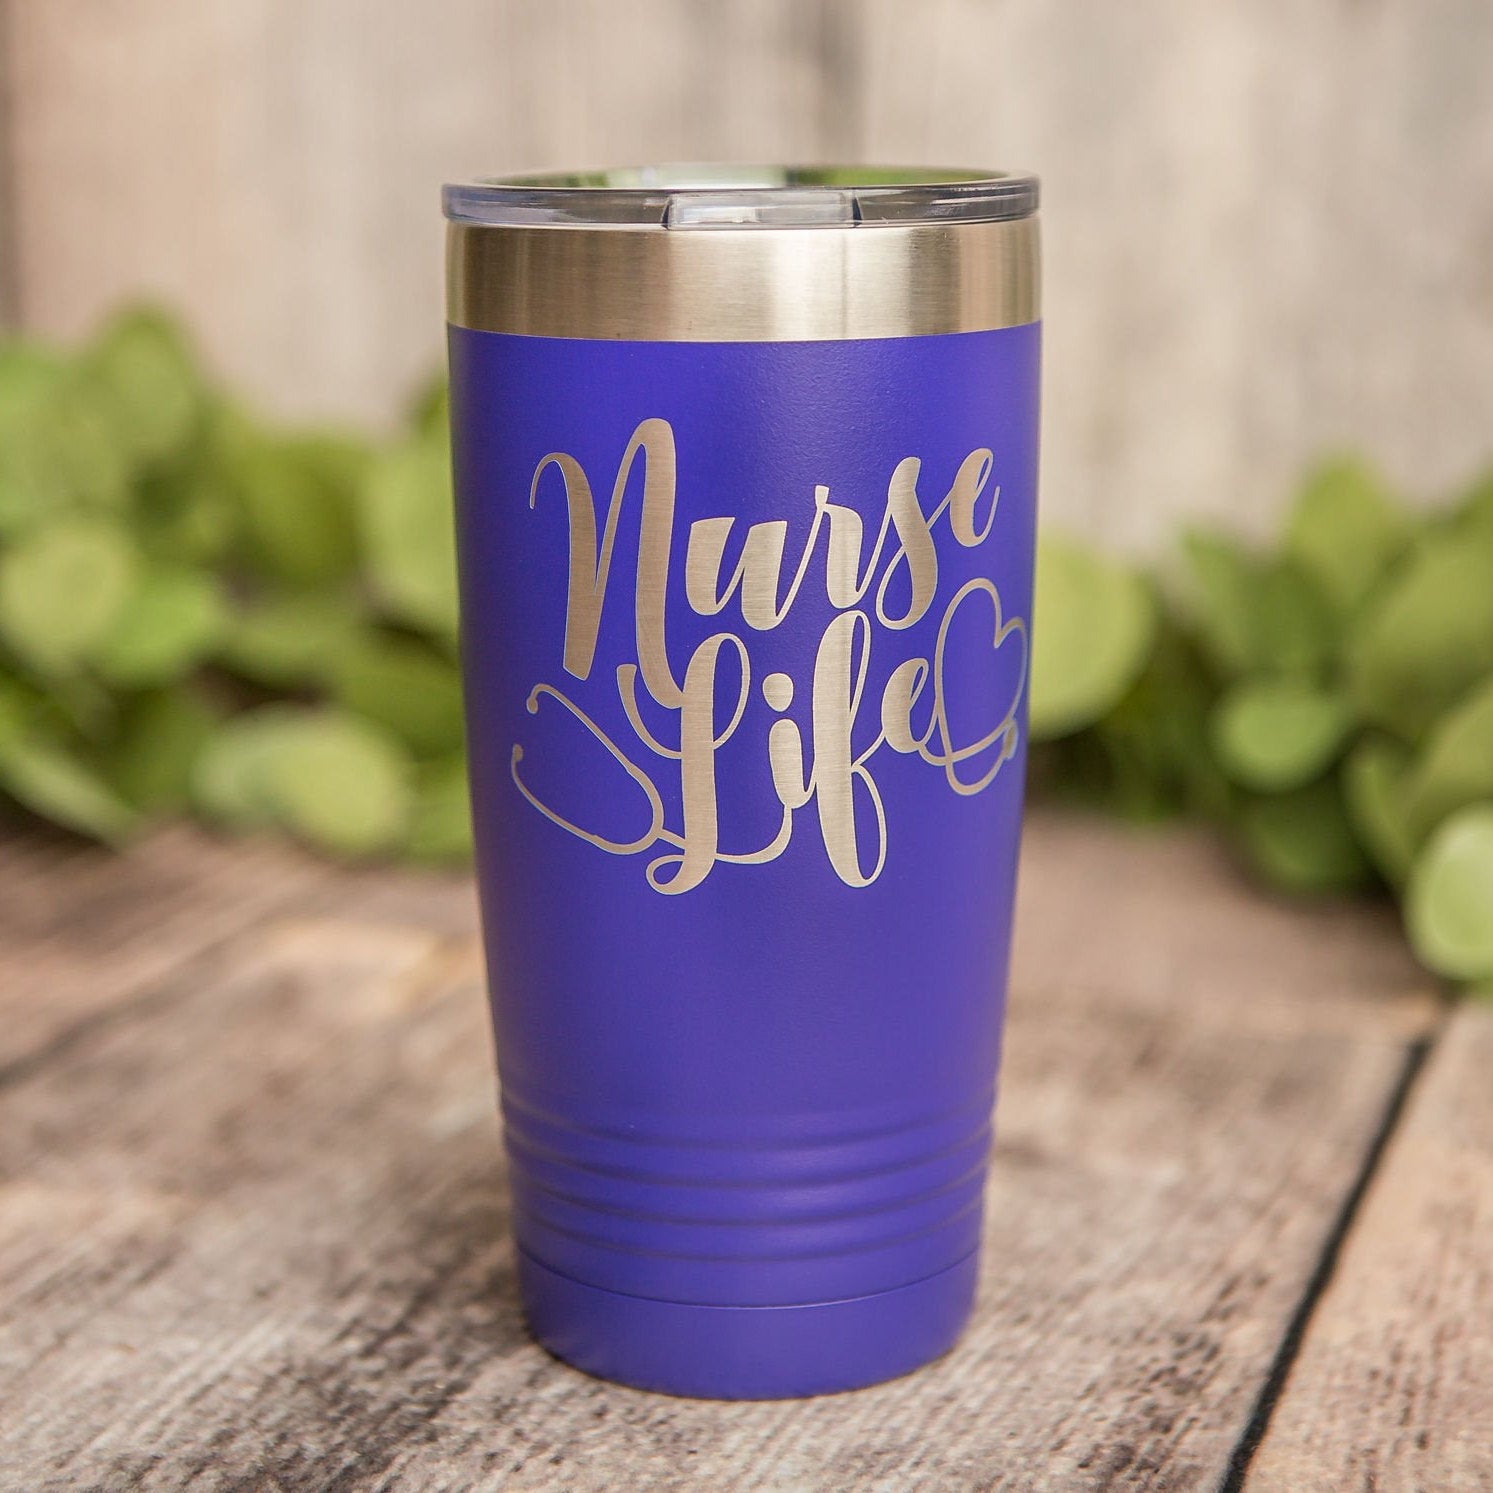 https://3cetching.com/wp-content/uploads/2020/09/nurse-life-engraved-stainless-steel-tumbler-yeti-style-cup-nursing-graduation-5f5fb5e9.jpg